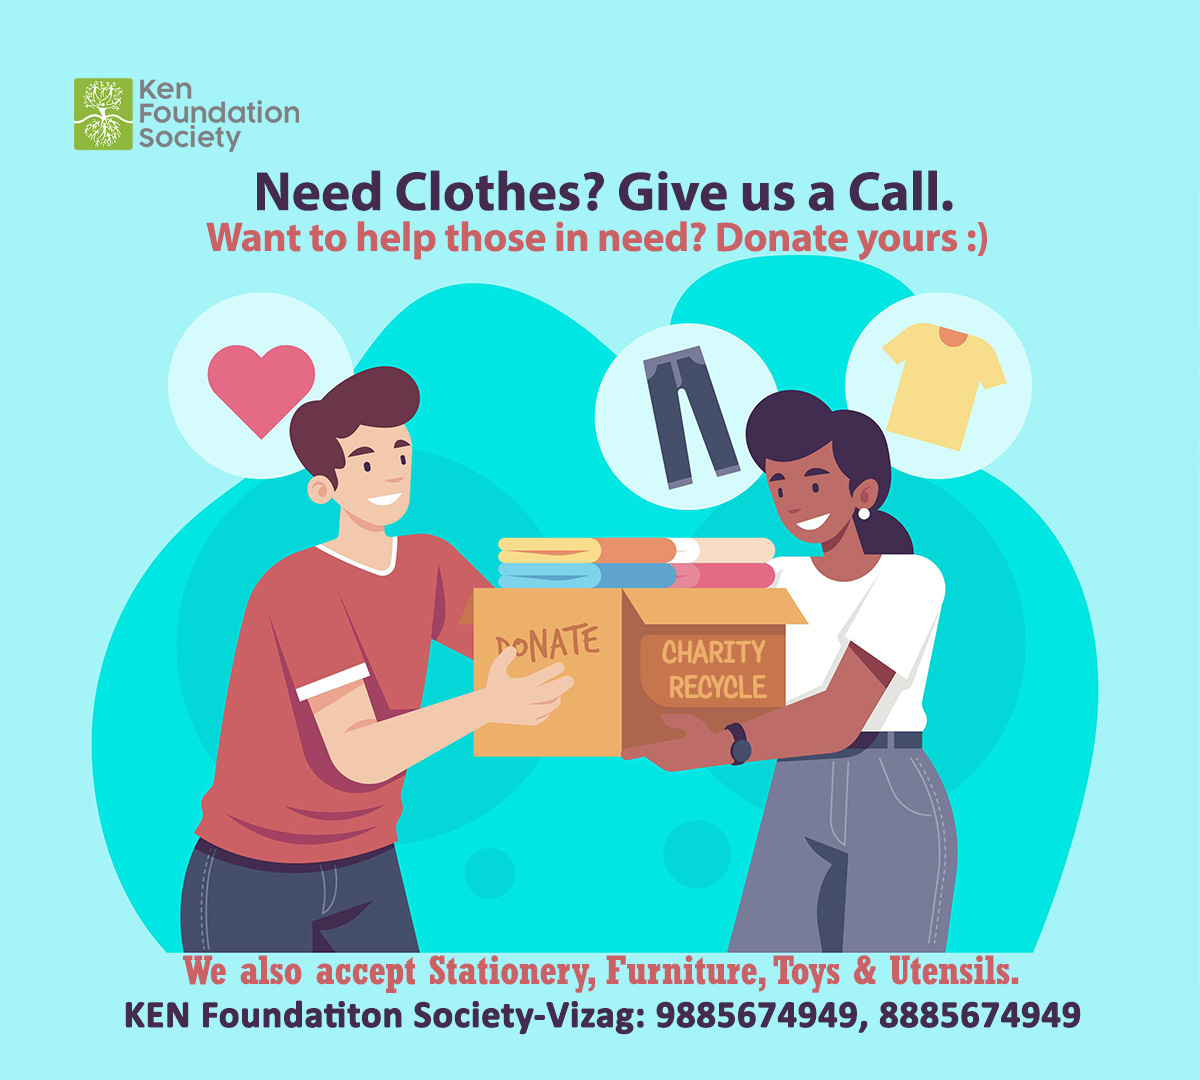 Sharing is Caring! You can donate almost everything like books, stationary, clothes, utensils, bed sheets, toys, blankets, shoes. Ken Foundation Society- #Vizag: 9885674949, 8885674949 
#CharityRecycle #DonateOldClothes  #CommunitySupport #KenFoundation